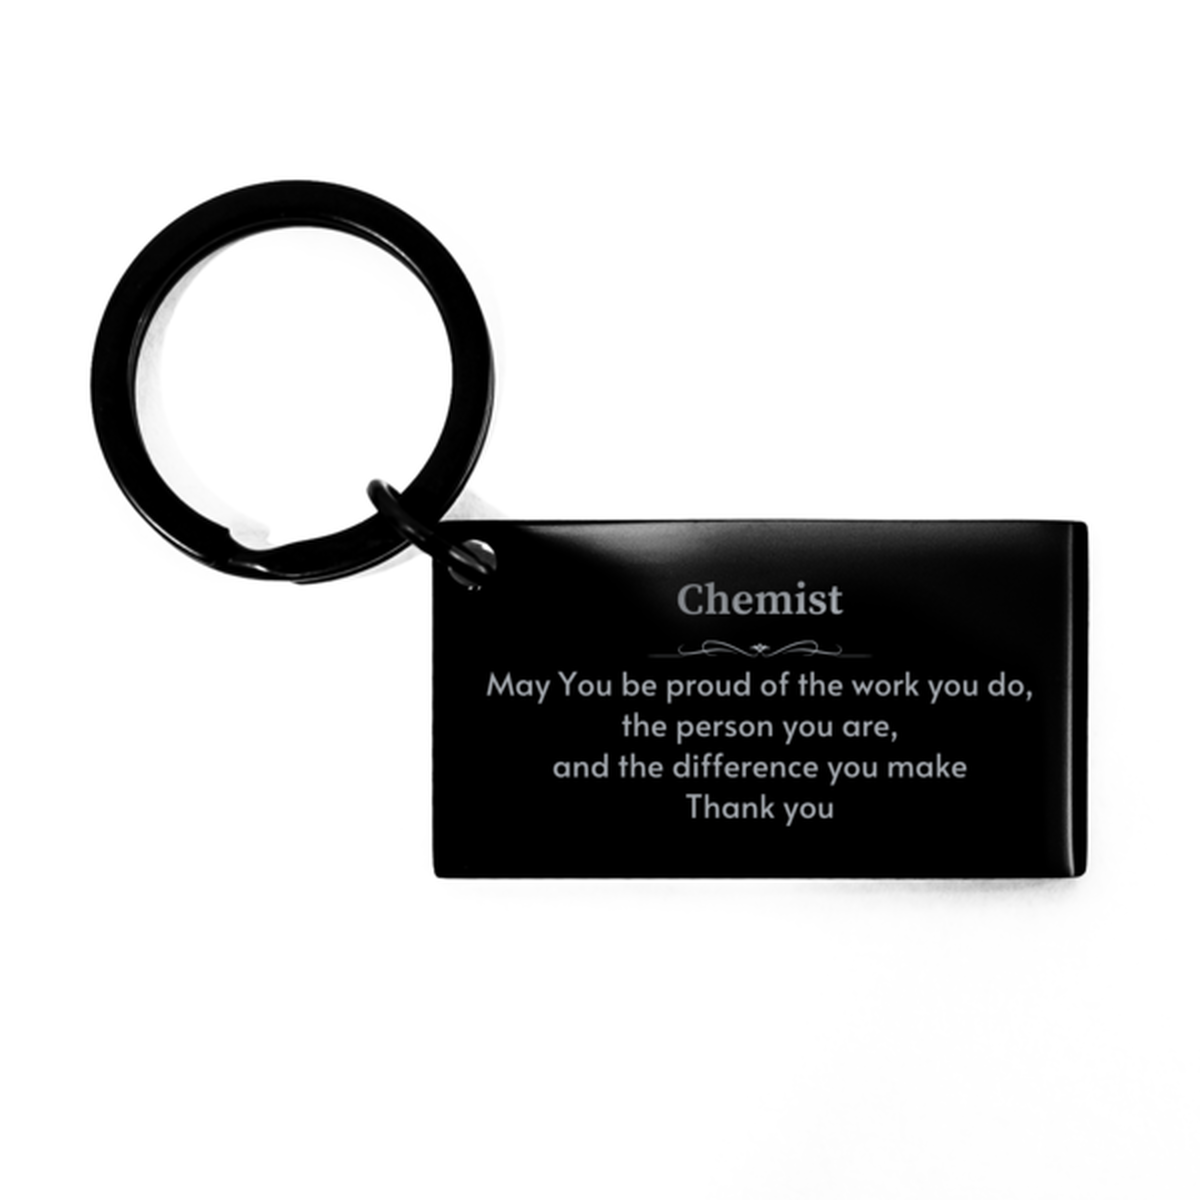 Heartwarming Keychain Retirement Coworkers Gifts for Chemist, Developer May You be proud of the work you do, the person you are Gifts for Boss Men Women Friends